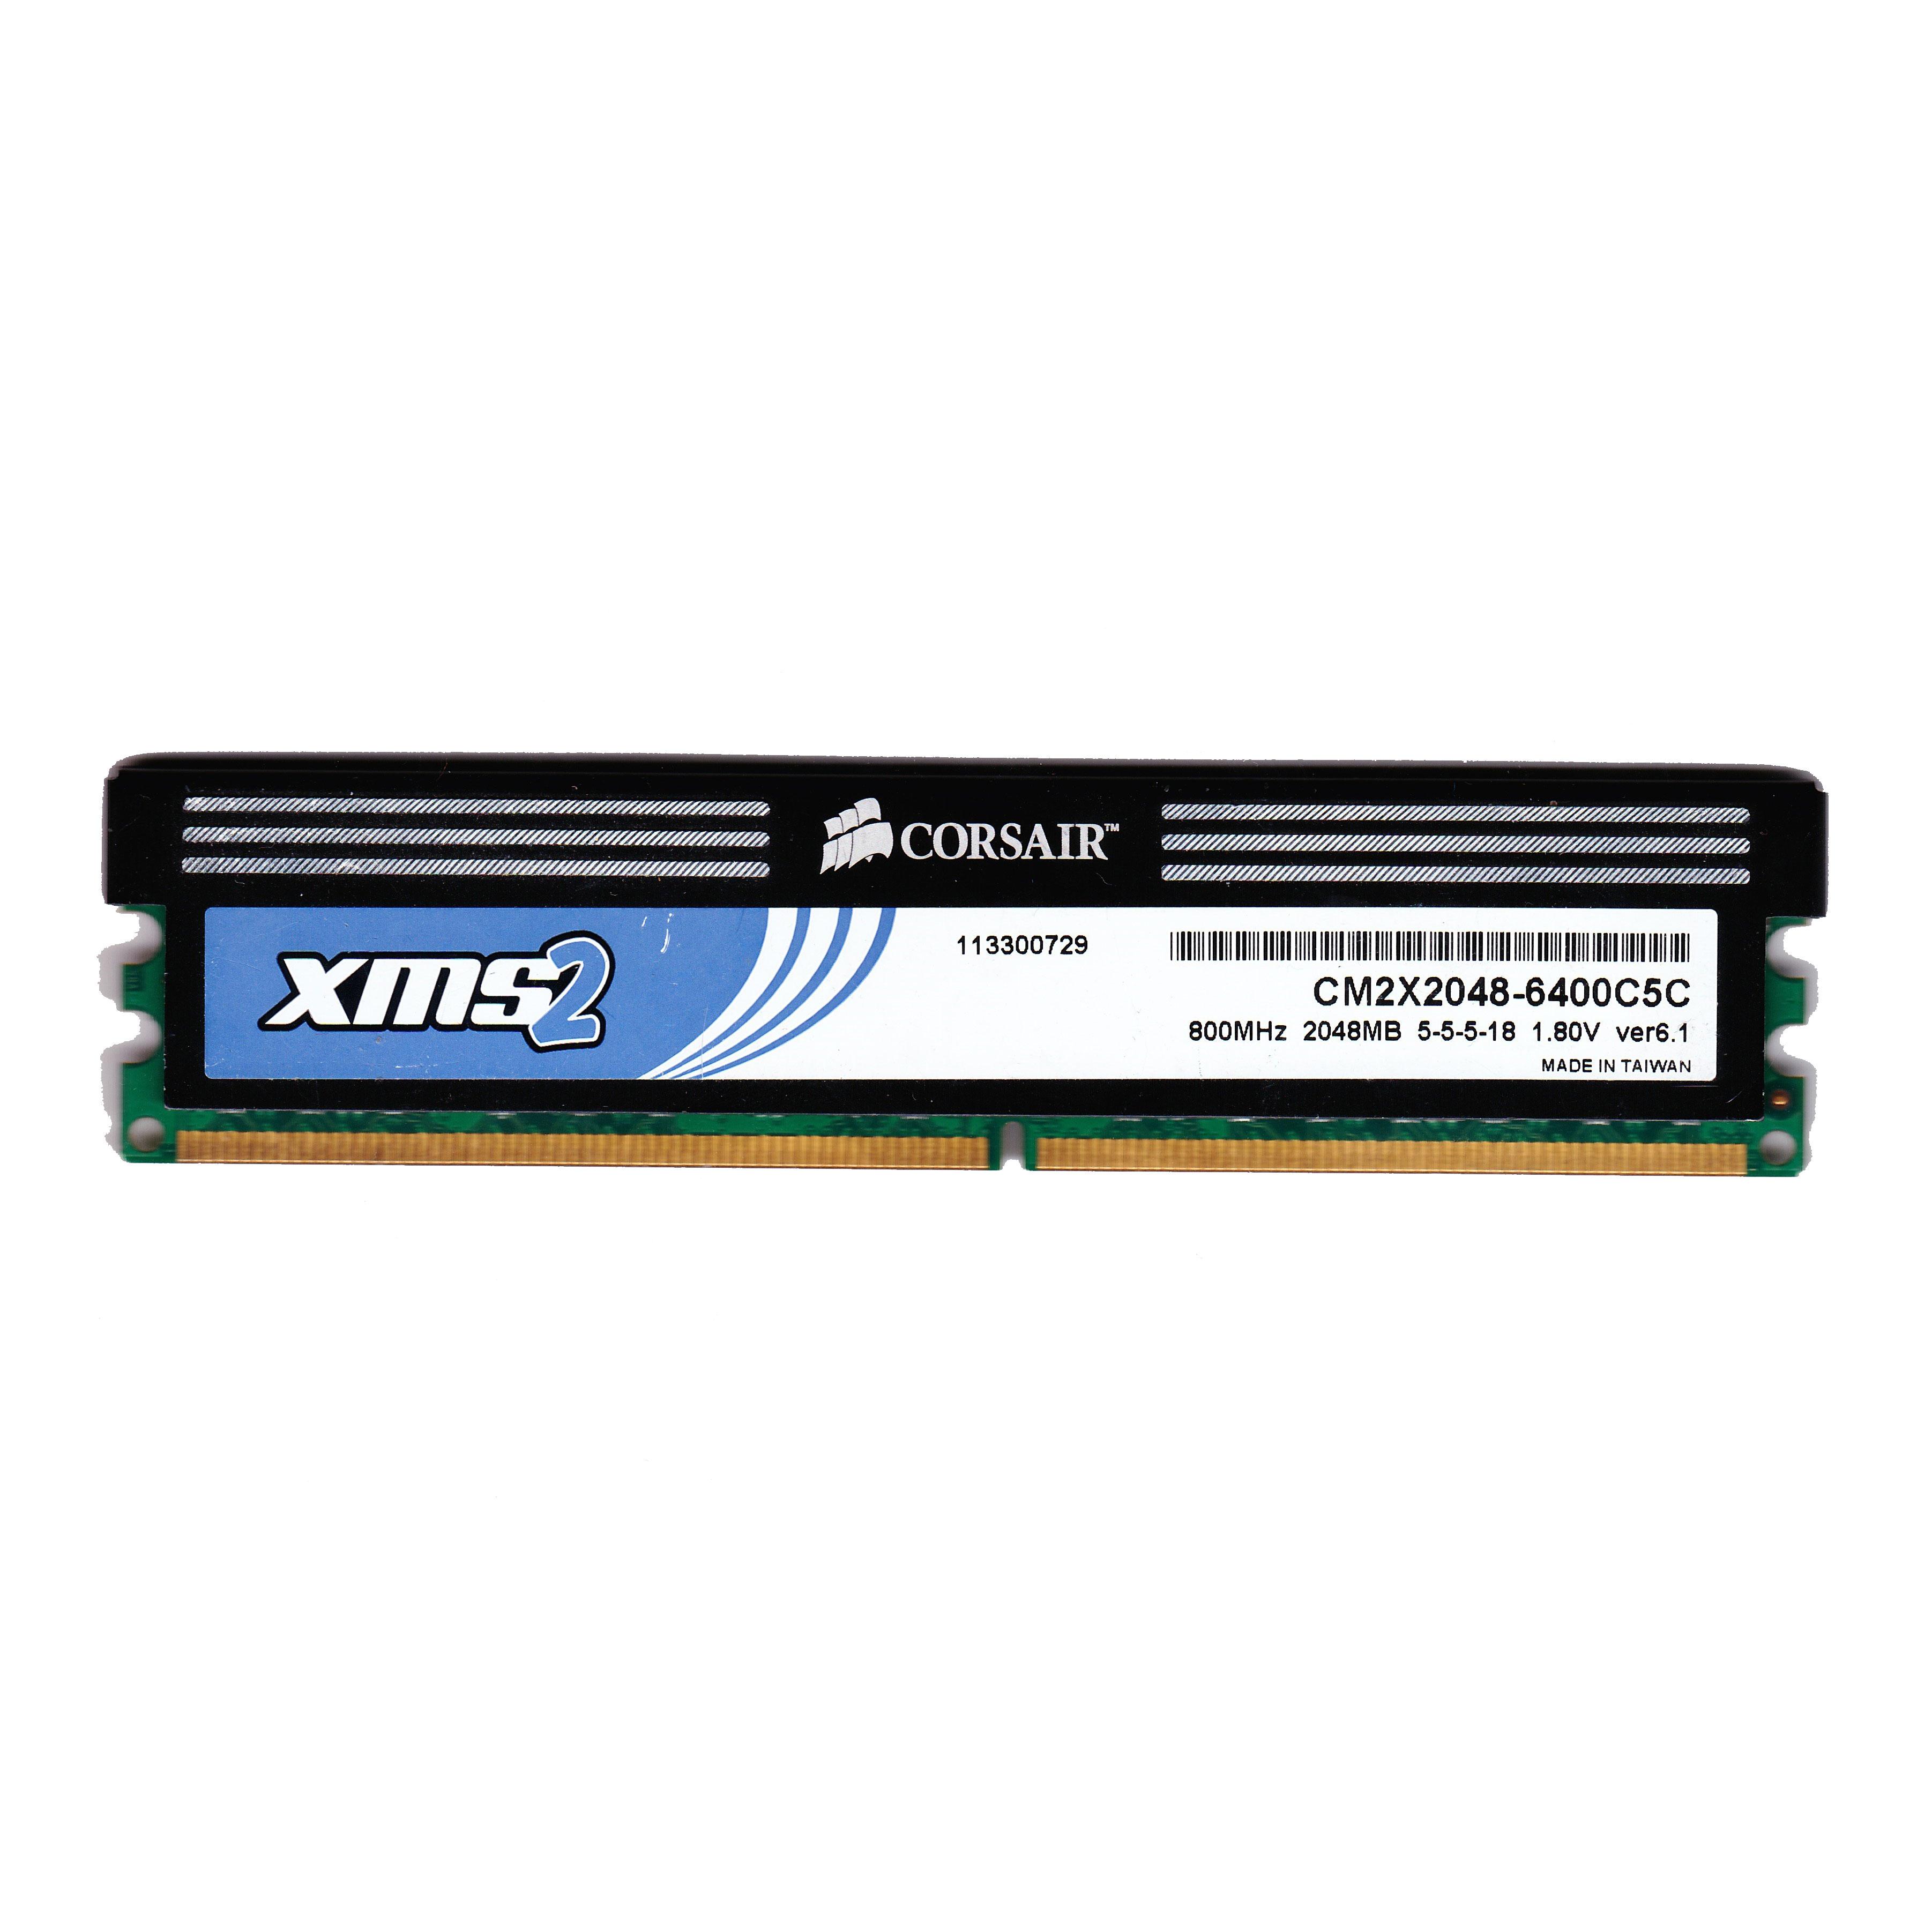 Preowned XMS2 2048MB DDR2 RAM Untested